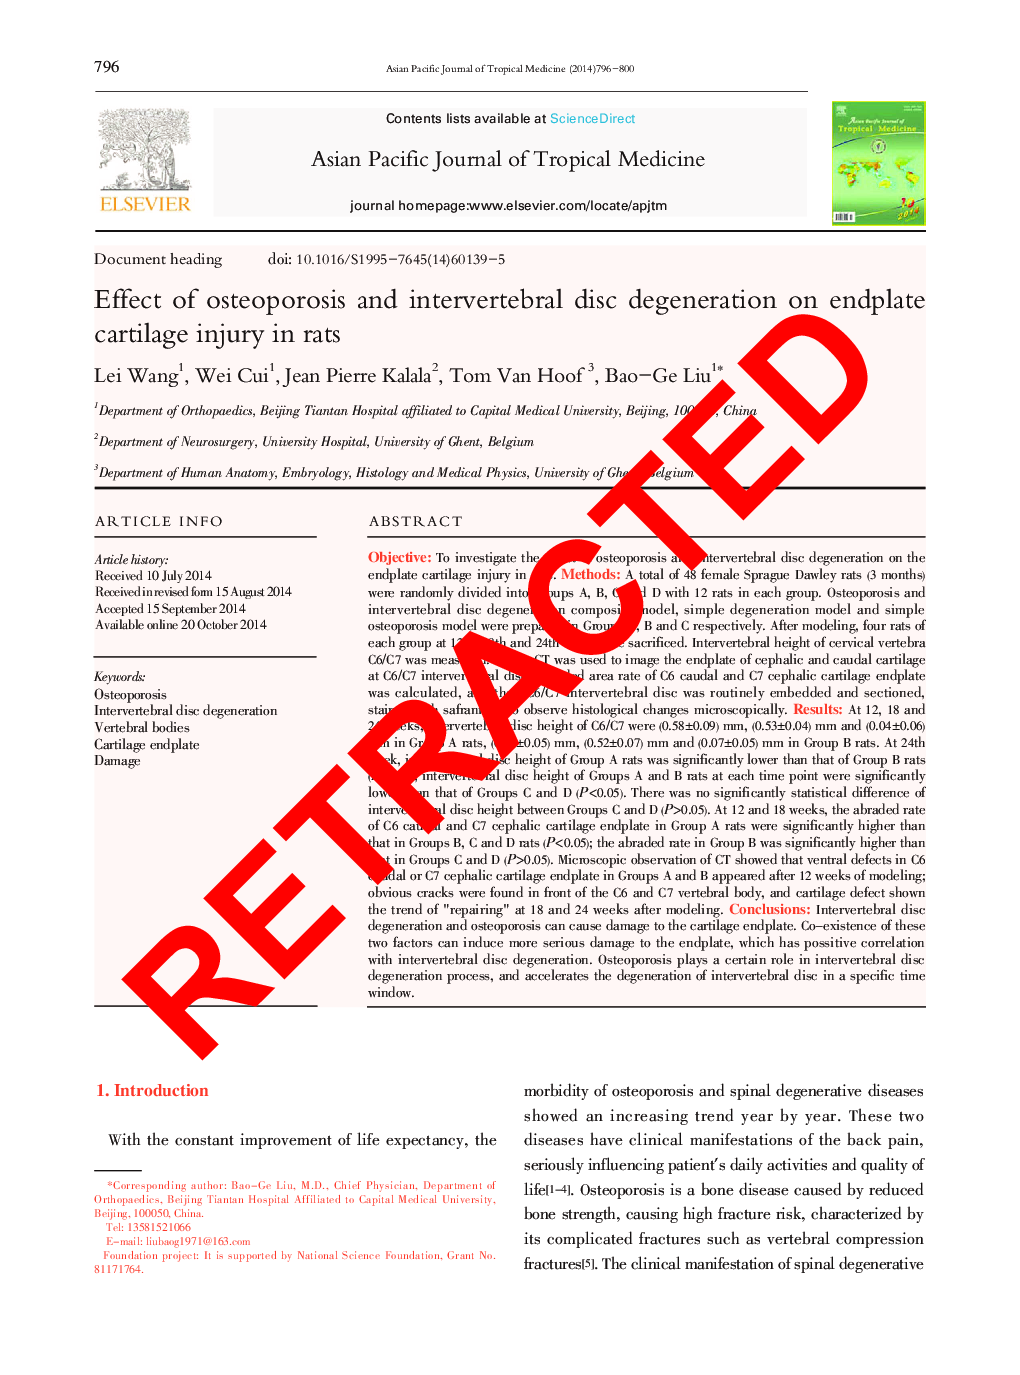 RETRACTED: To investigate the effect of osteoporosis and intervertebral disc degeneration on the endplate cartilage injury in rats